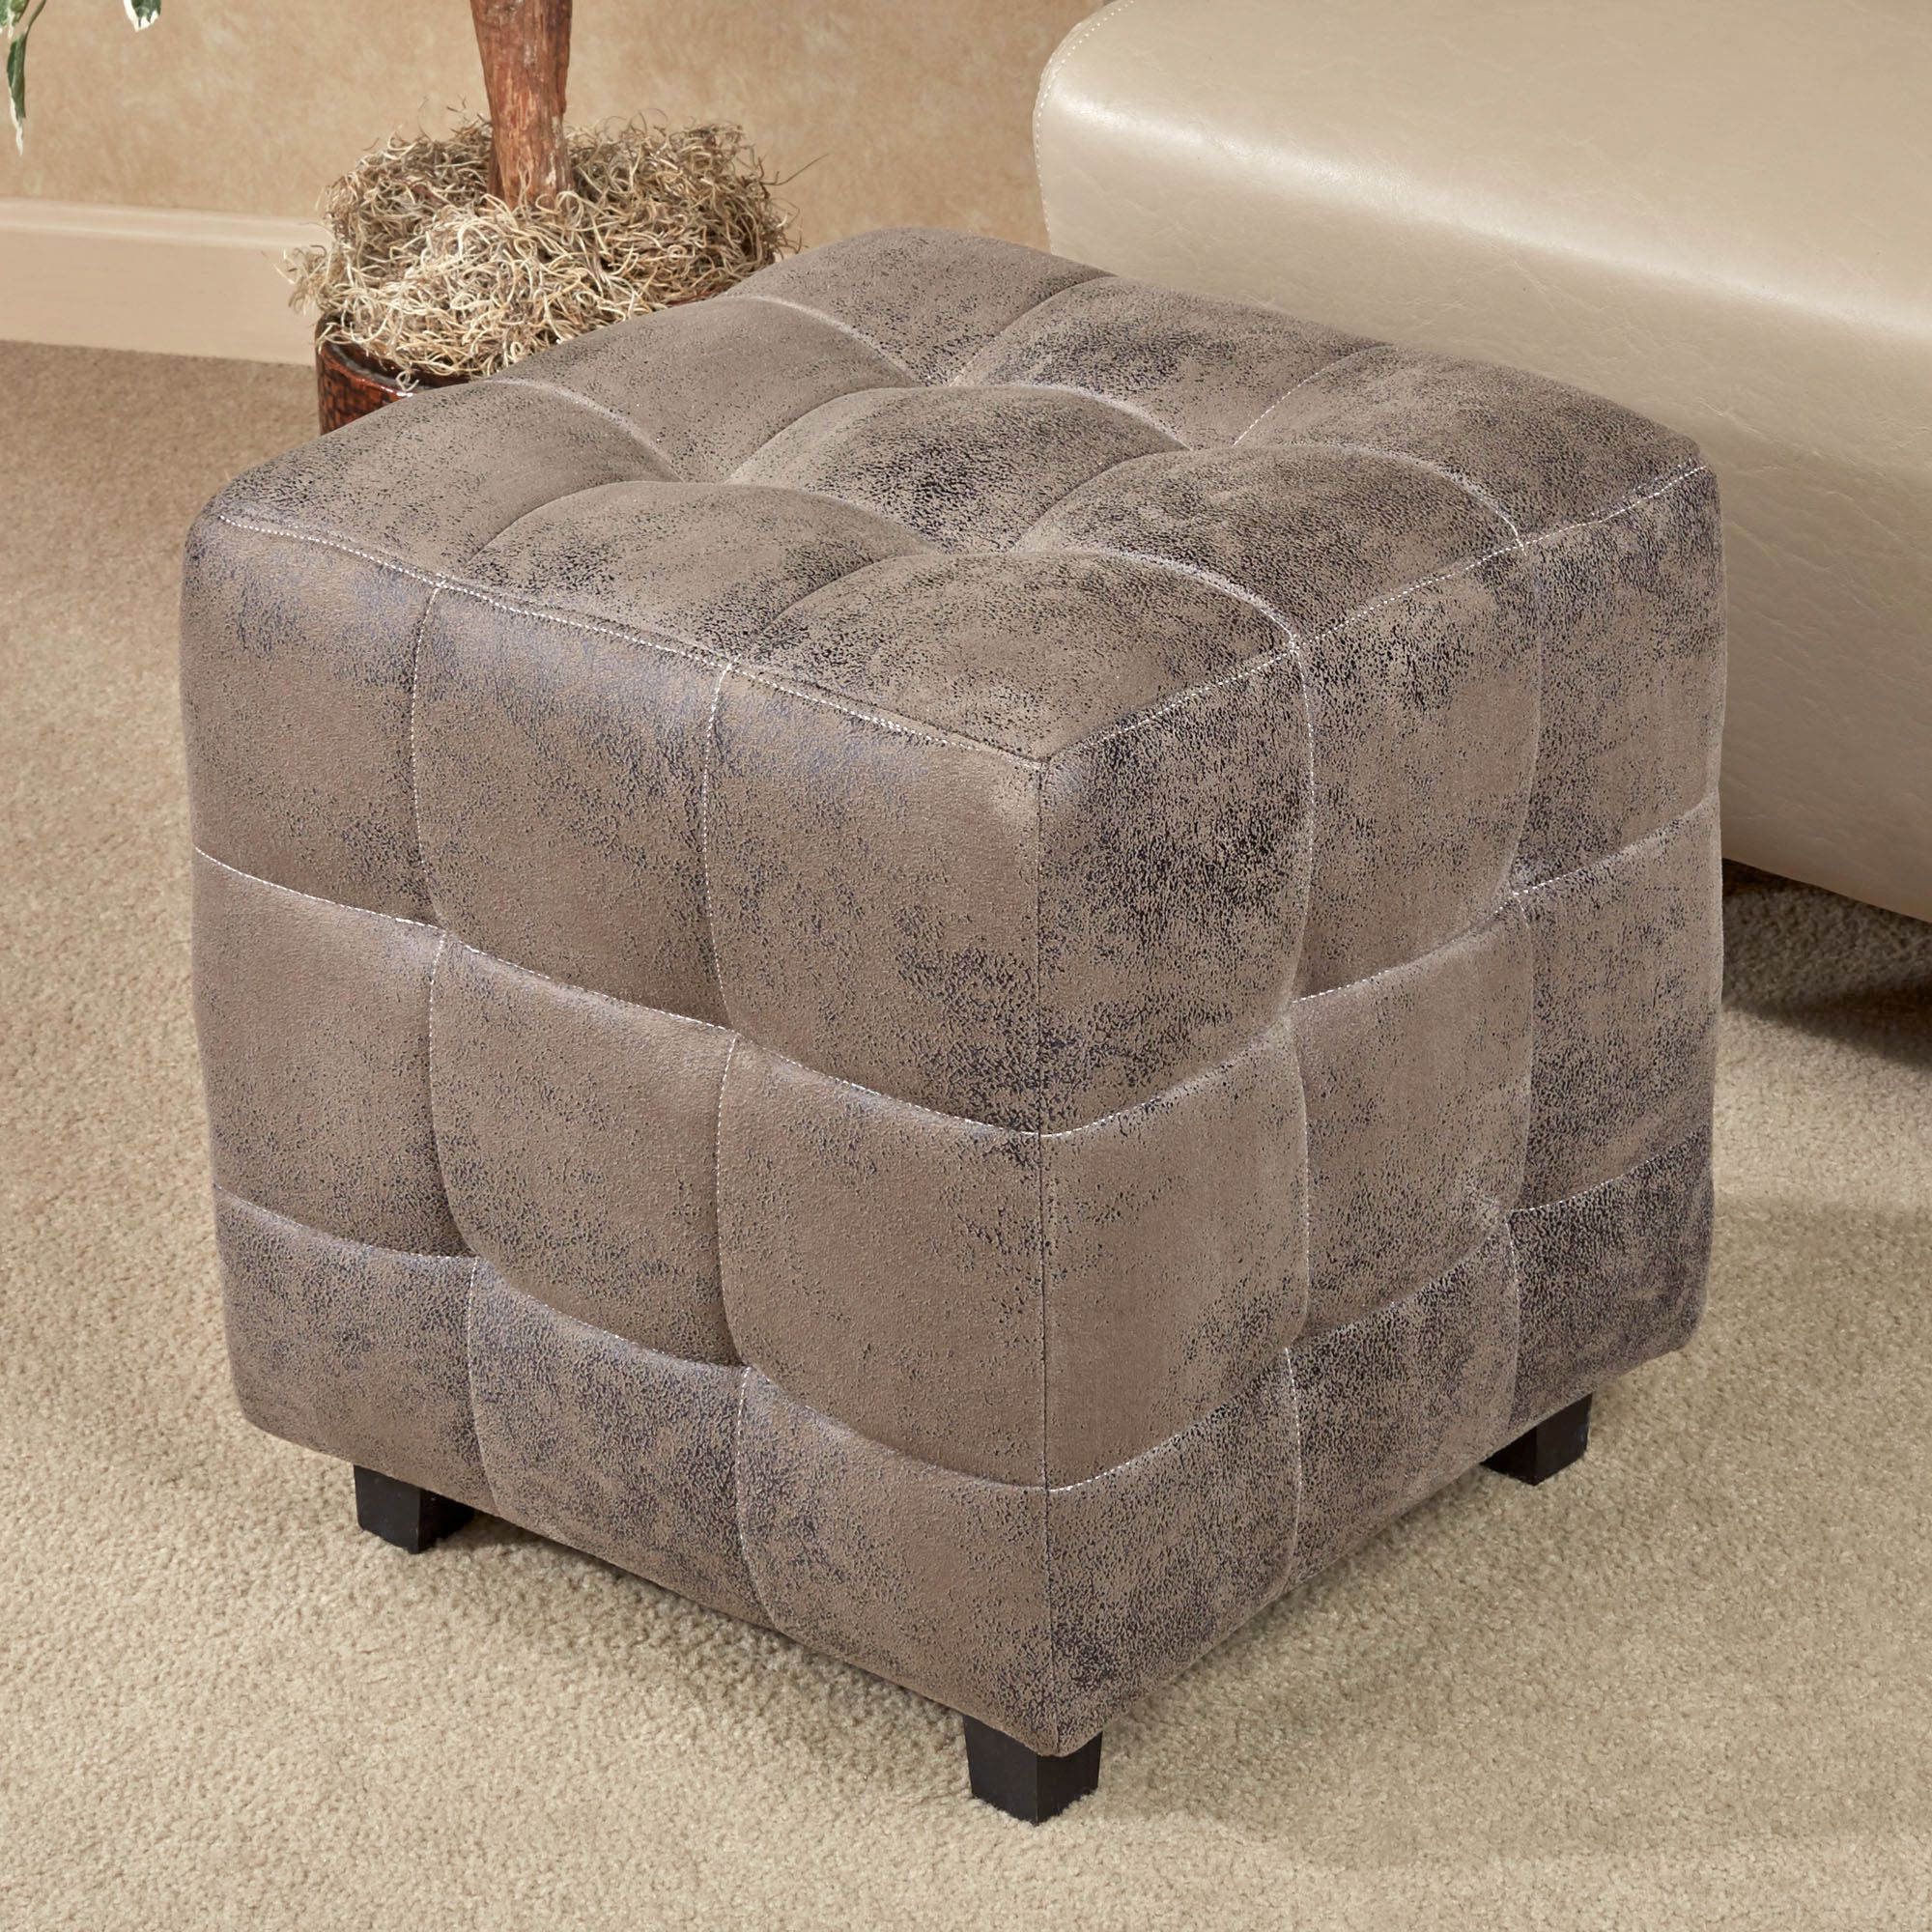 Gray Wool Pouf Ottomans Intended For Widely Used Nexus Dark Gray Faux Suede Ottoman (View 5 of 10)